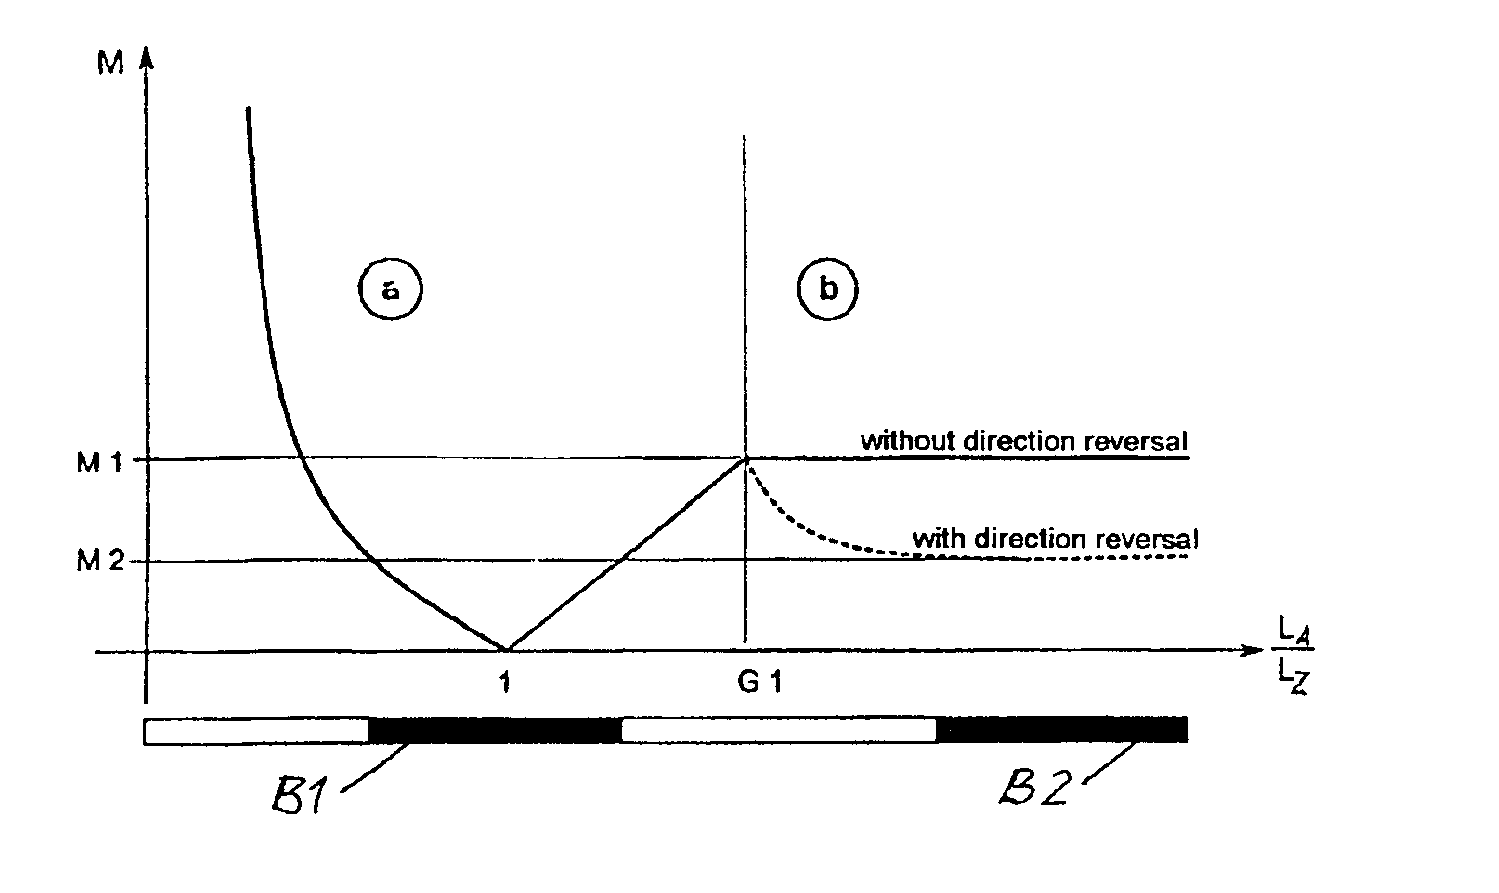 Method of crosscutting a moving web